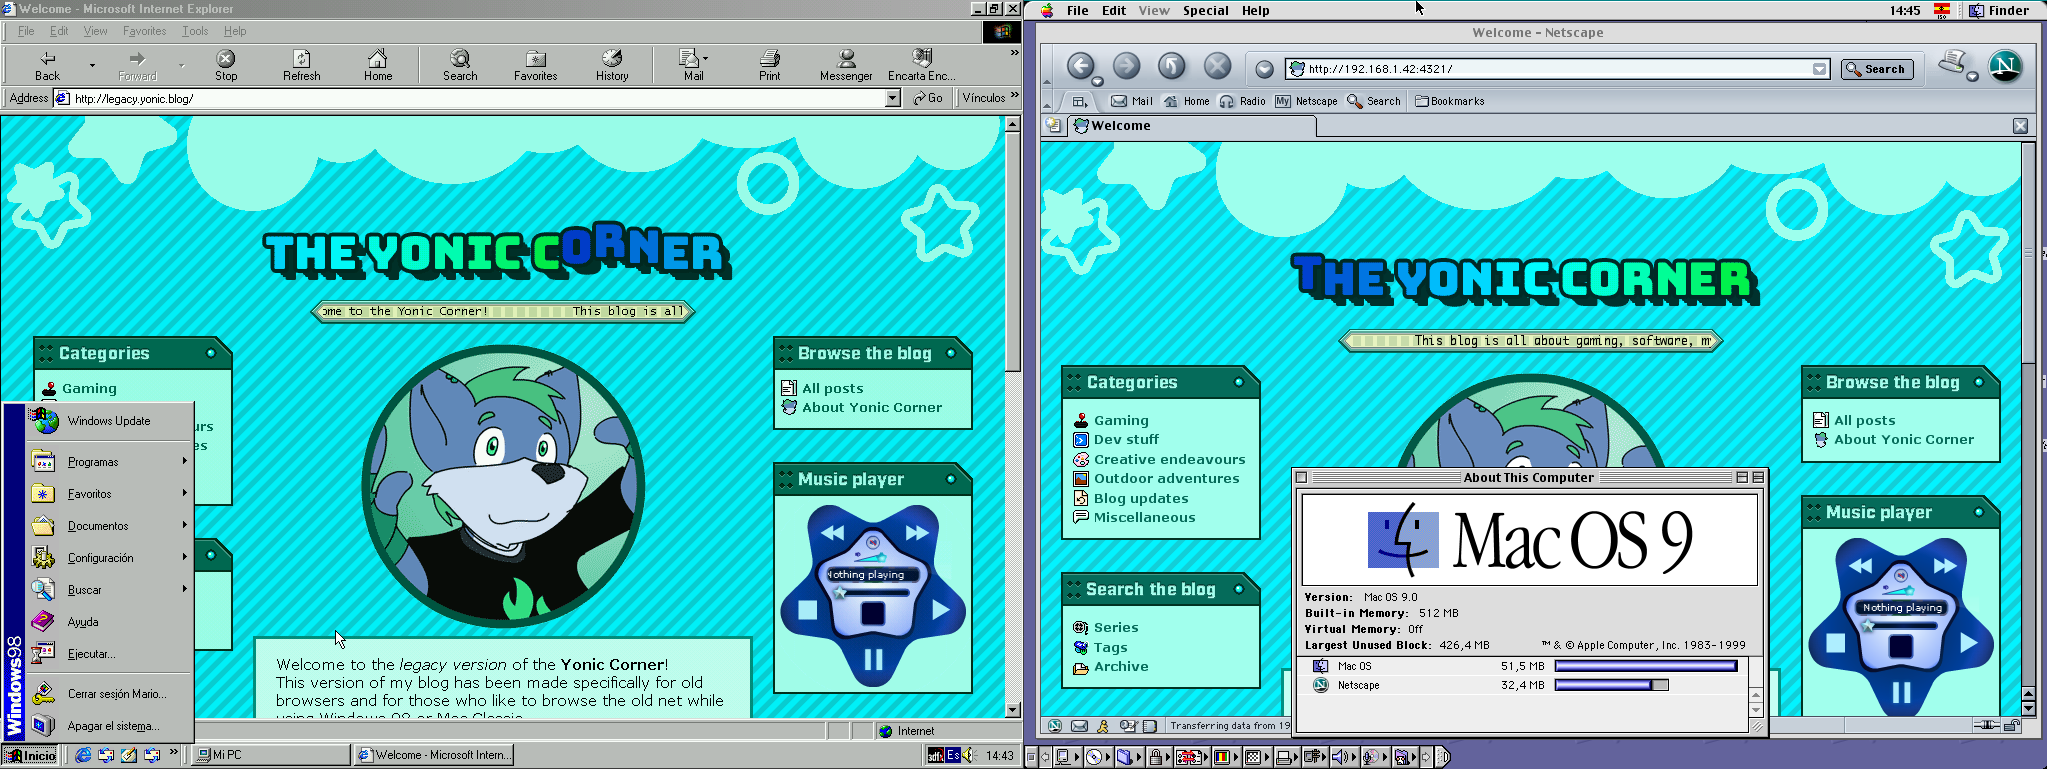 The Yonic Corner on IE 5.5 for Windows 98 and Netscape 7 for Mac OS 9